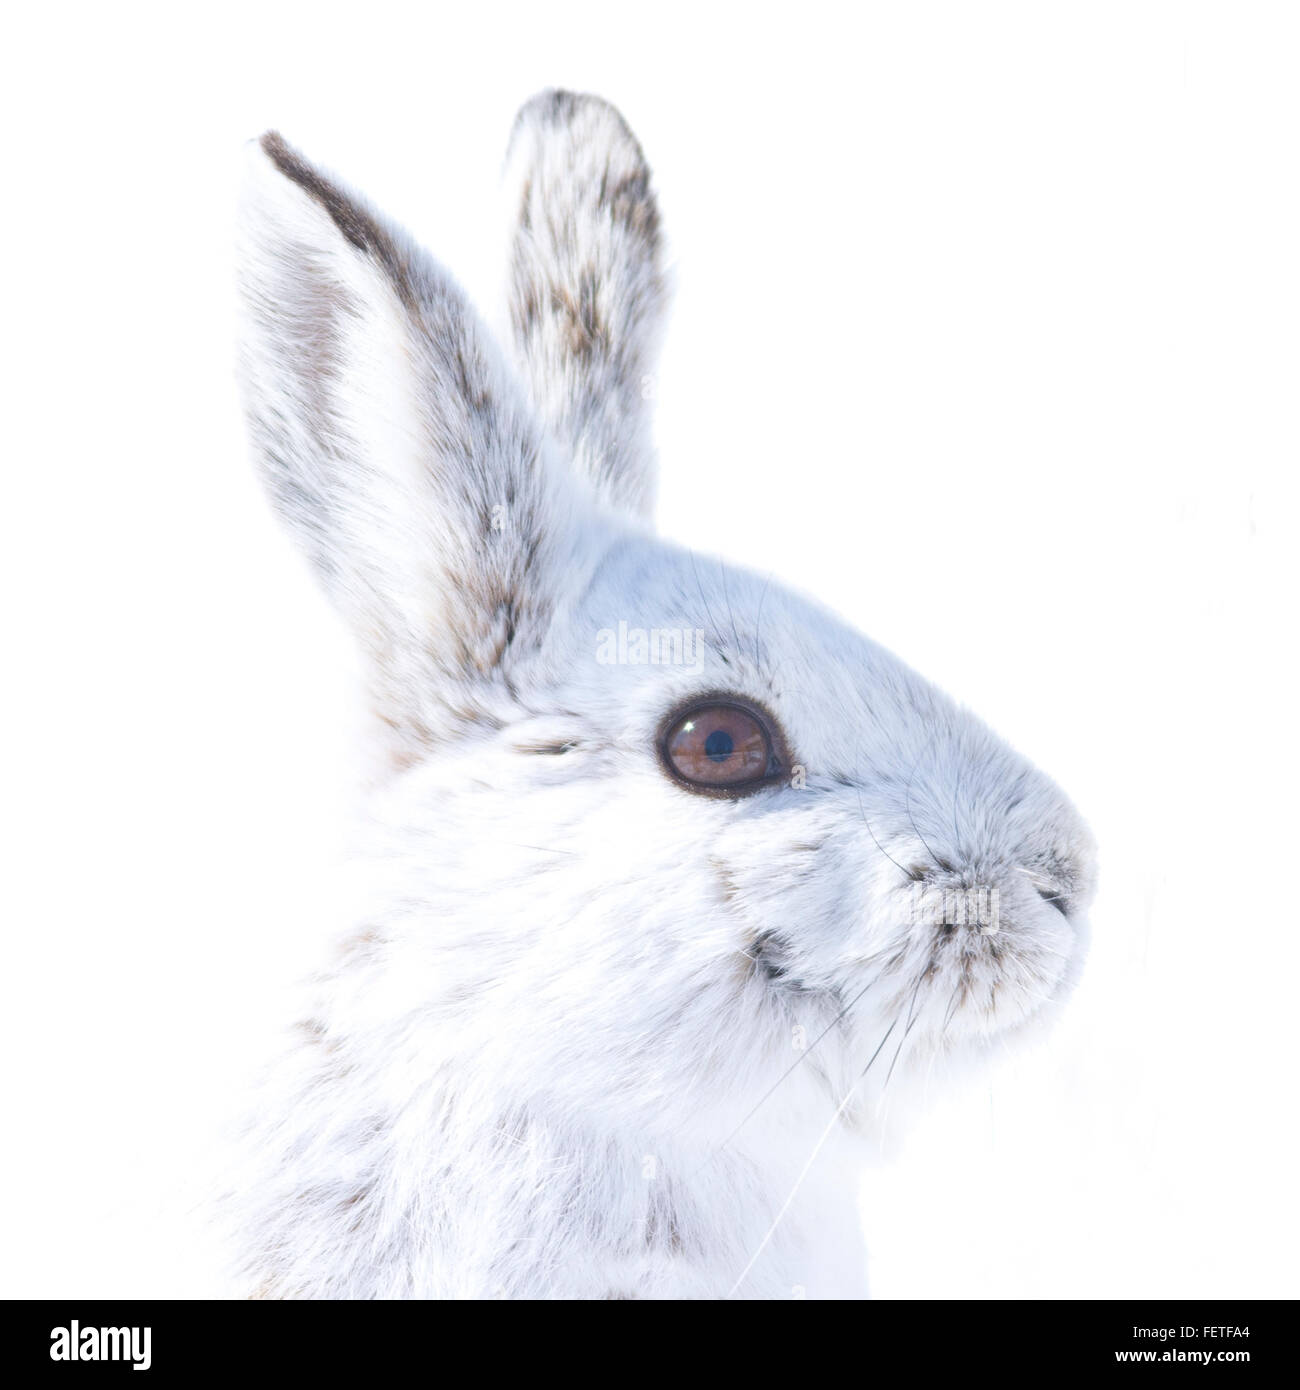 High-key portrait of snowshoe hare in winter coat facing right Stock Photo